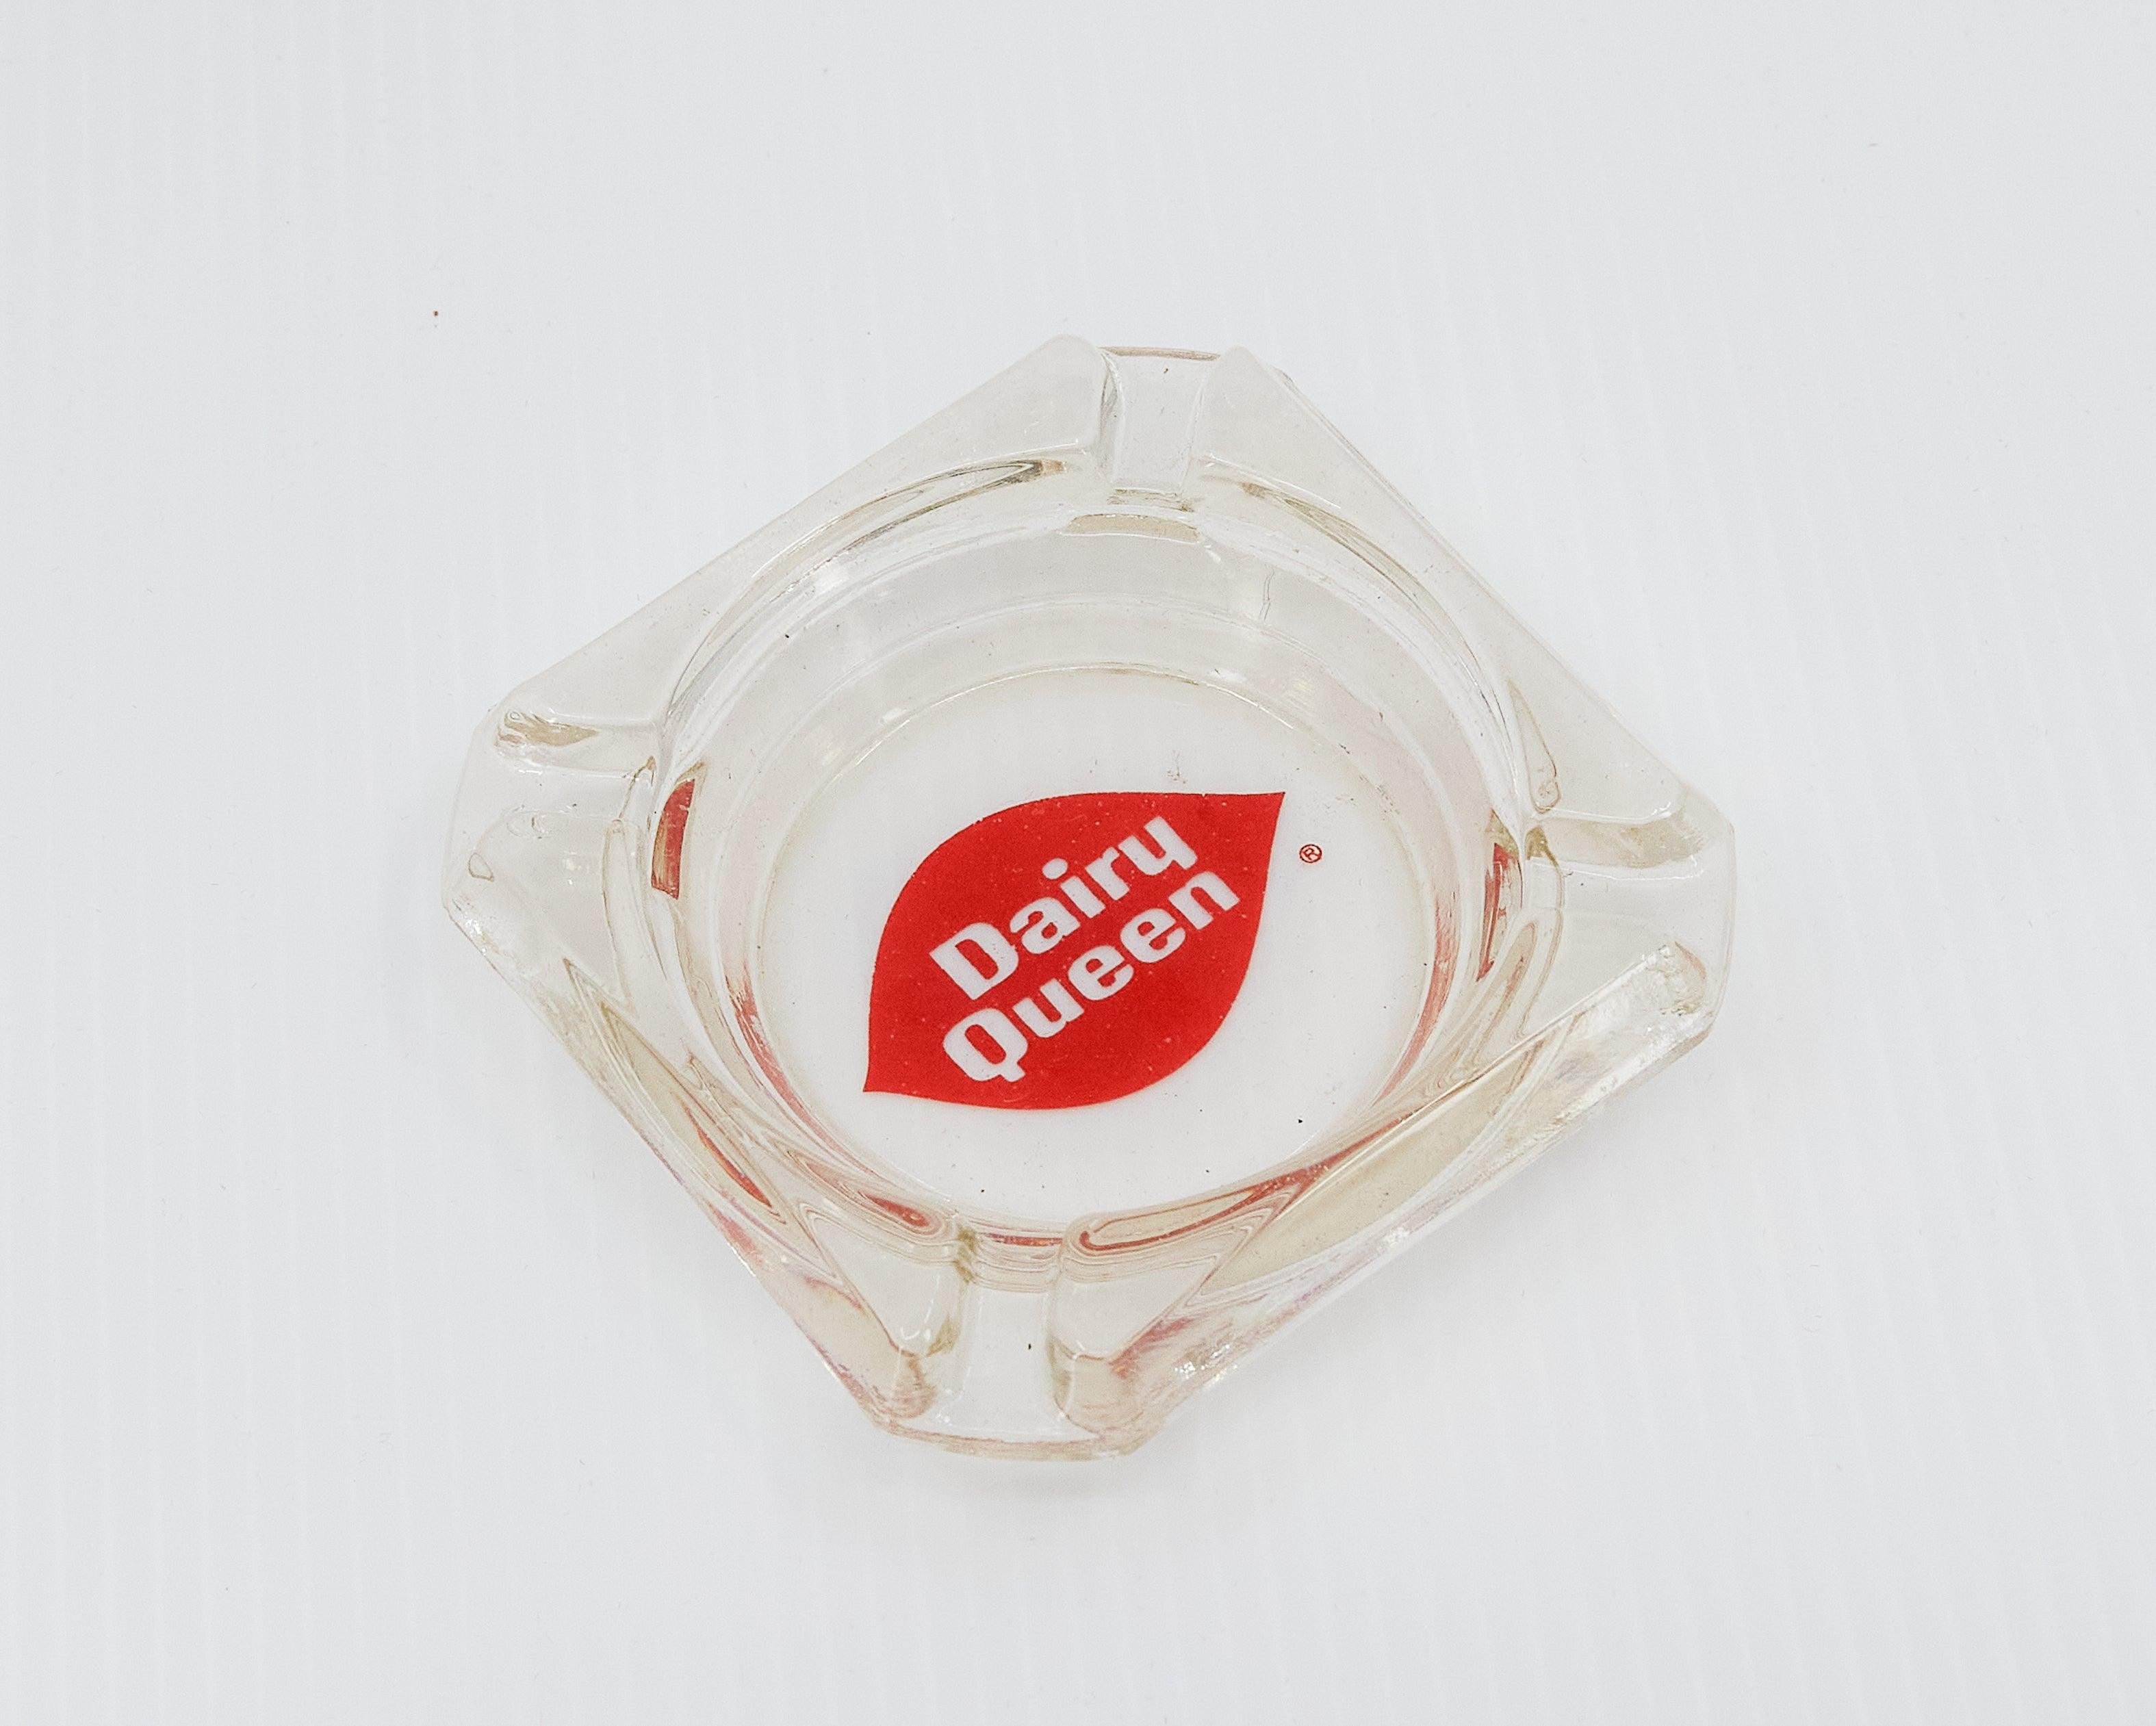 Vintage Dairy Queen Ashtray - Polychrome Goods 🍊